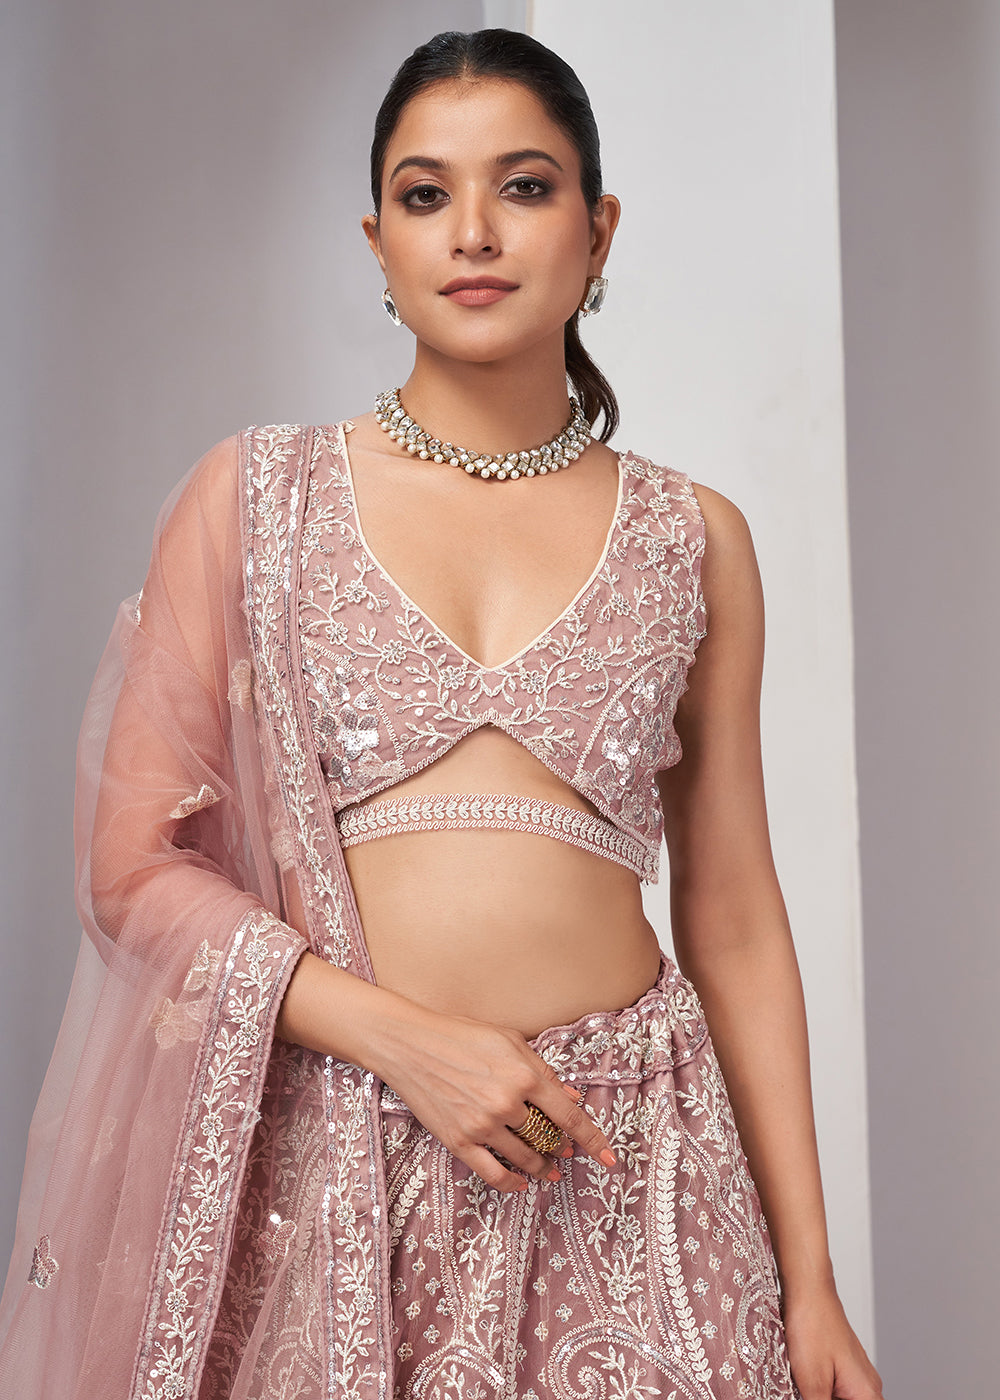 Buy Now Luxurious Chickoo Peach Heavy Embroidered Bridal Lehenga Choli Online in USA, UK, Canada & Worldwide at Empress Clothing. 